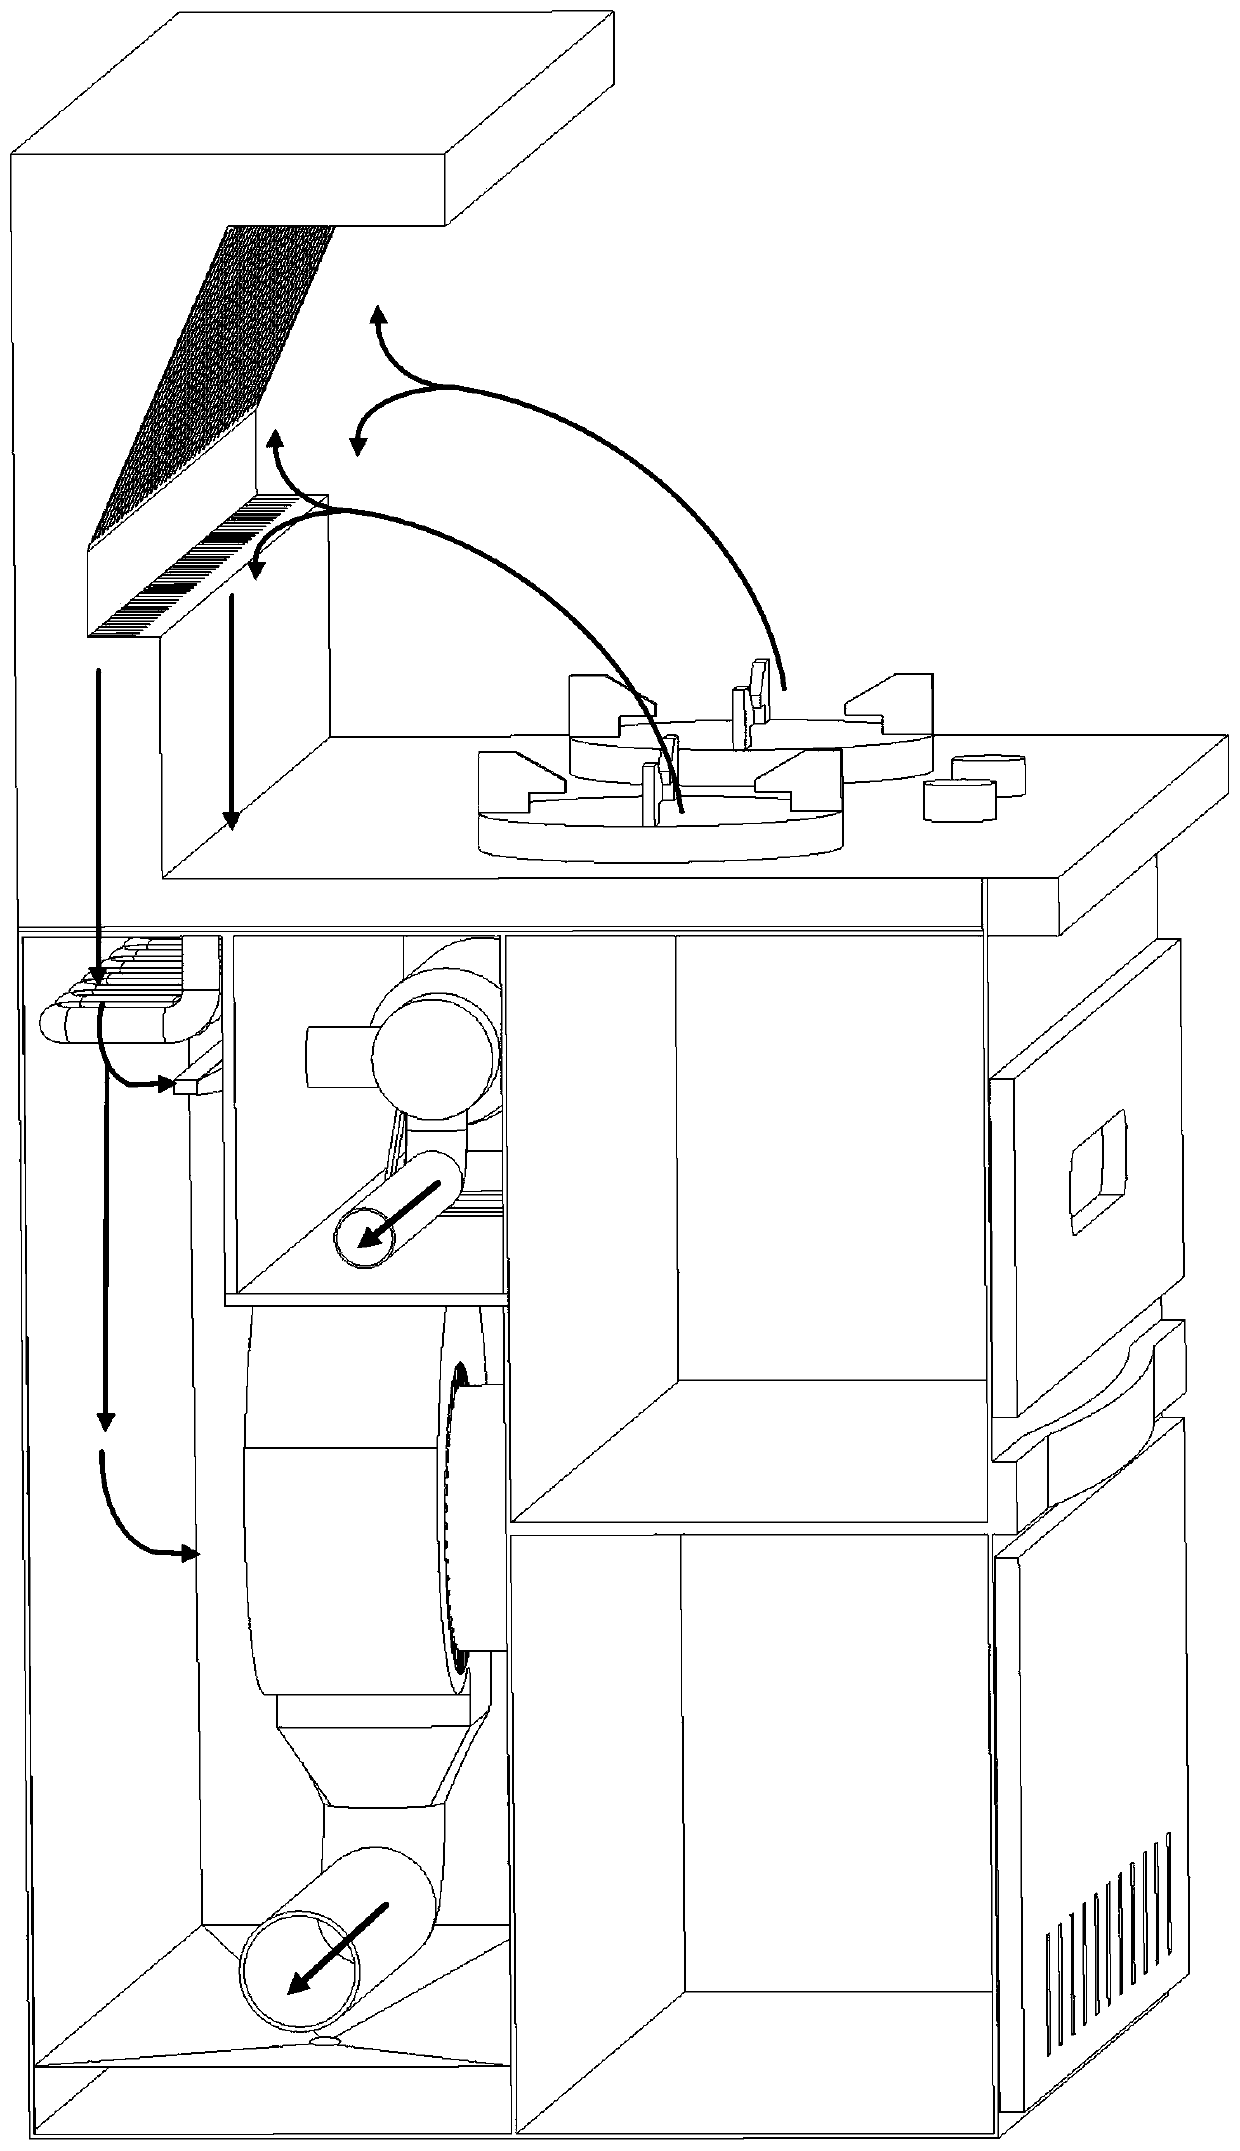 Novel integrated stove with vacuum device